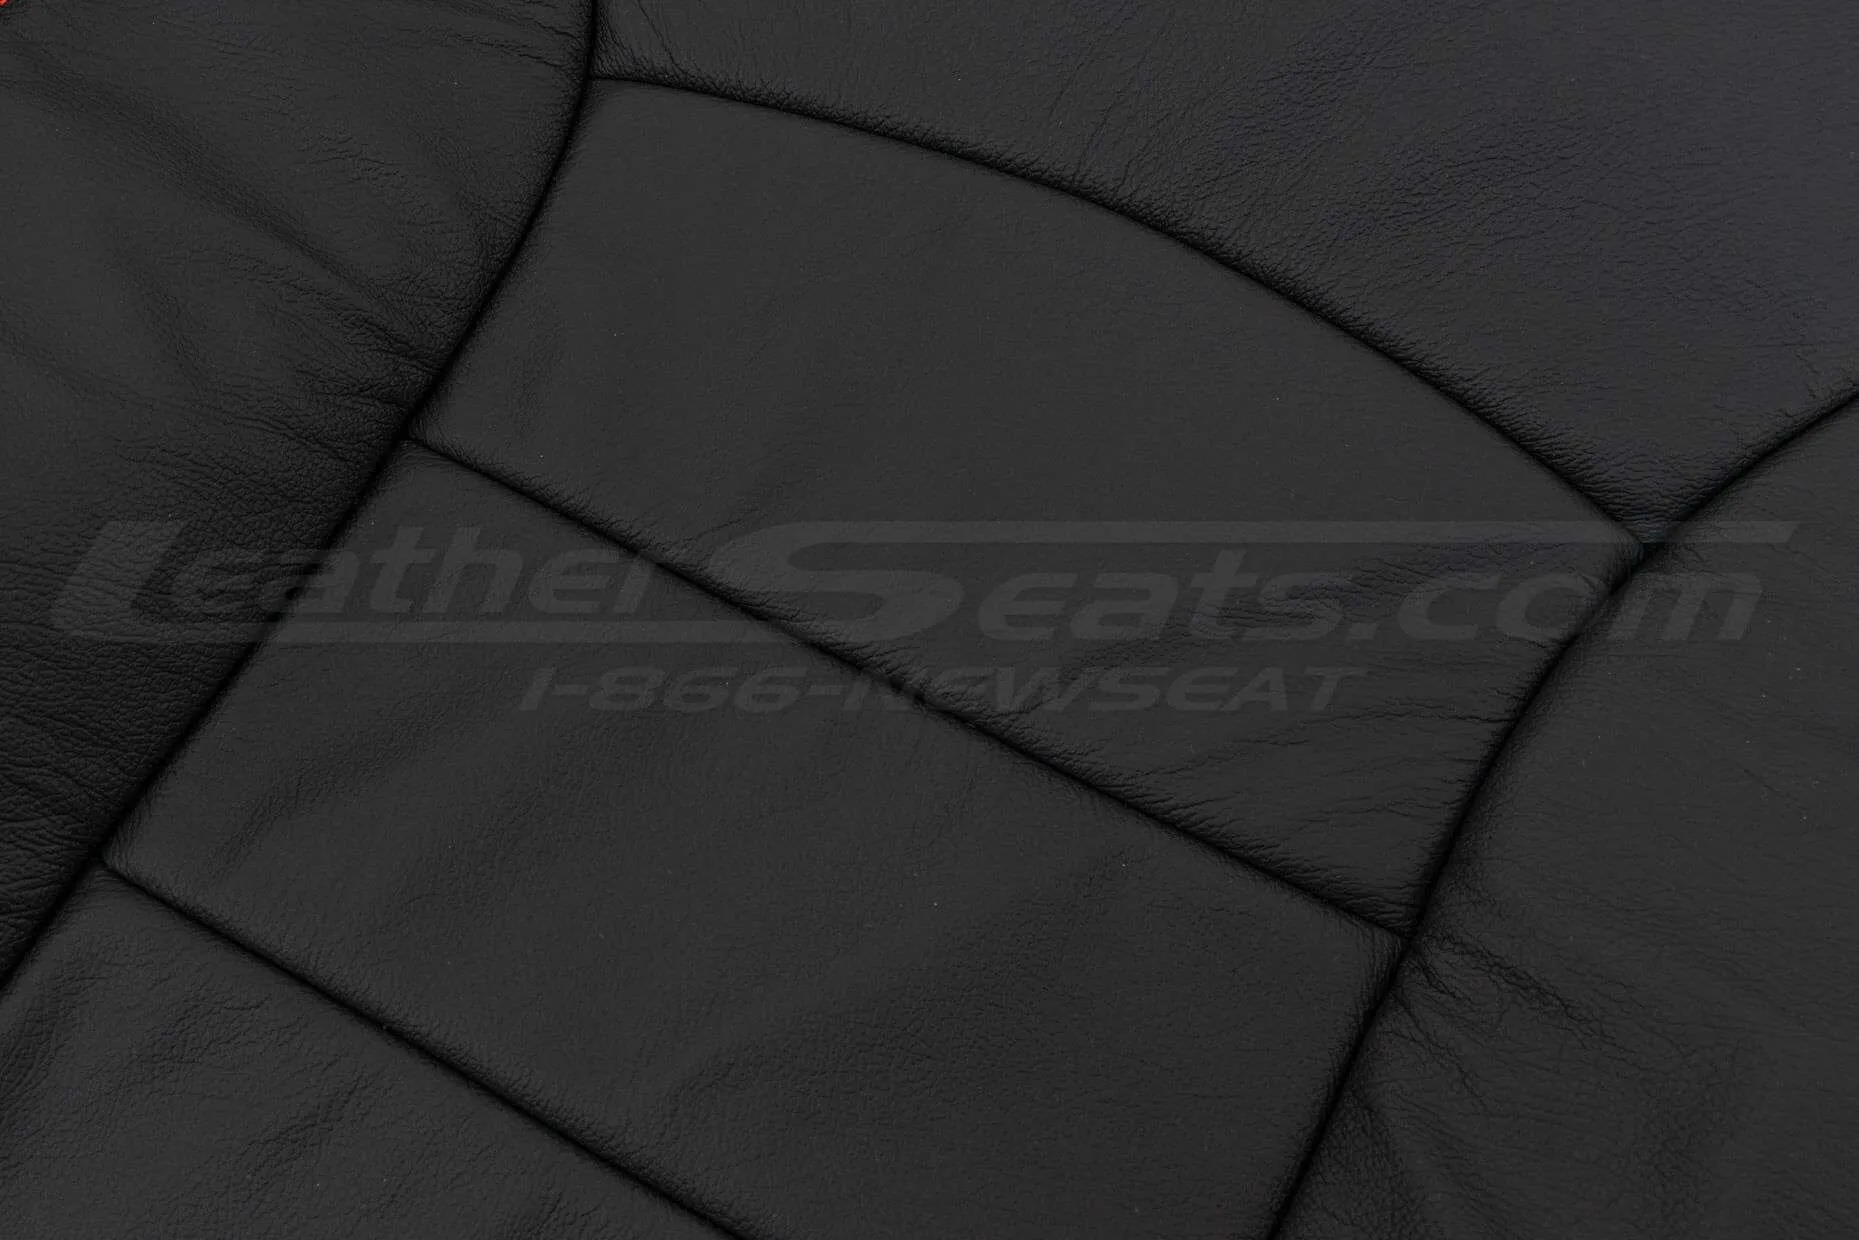 Backrest upholstery leather texture